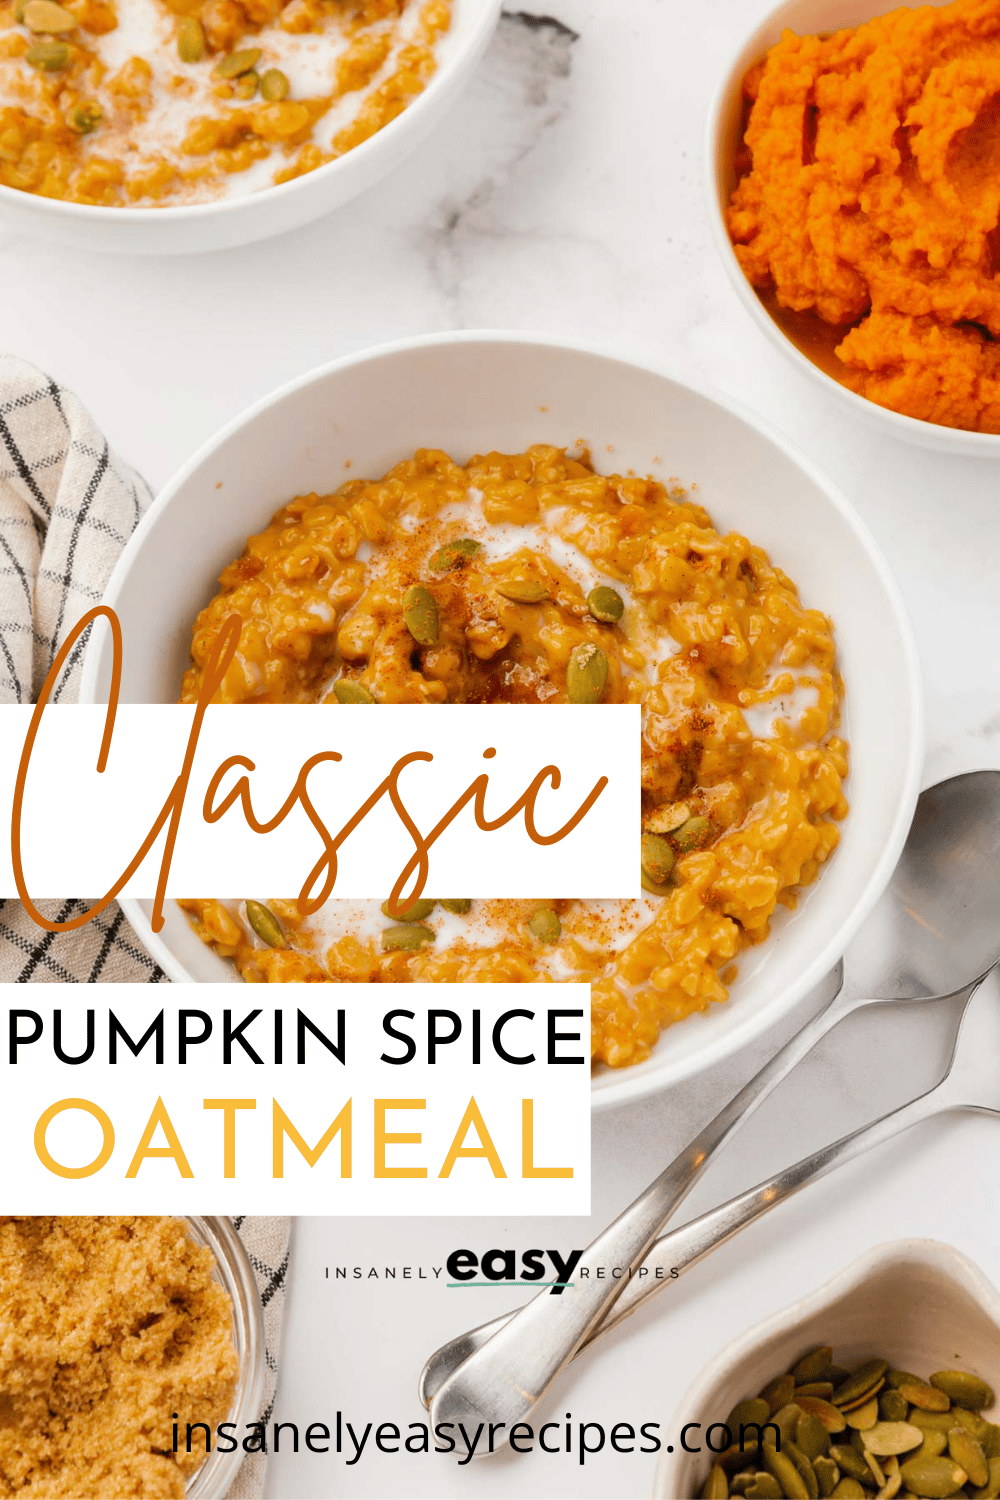 oatmeal with pumpkin. Text box in center says "classic pumpkin spice oatmeal"